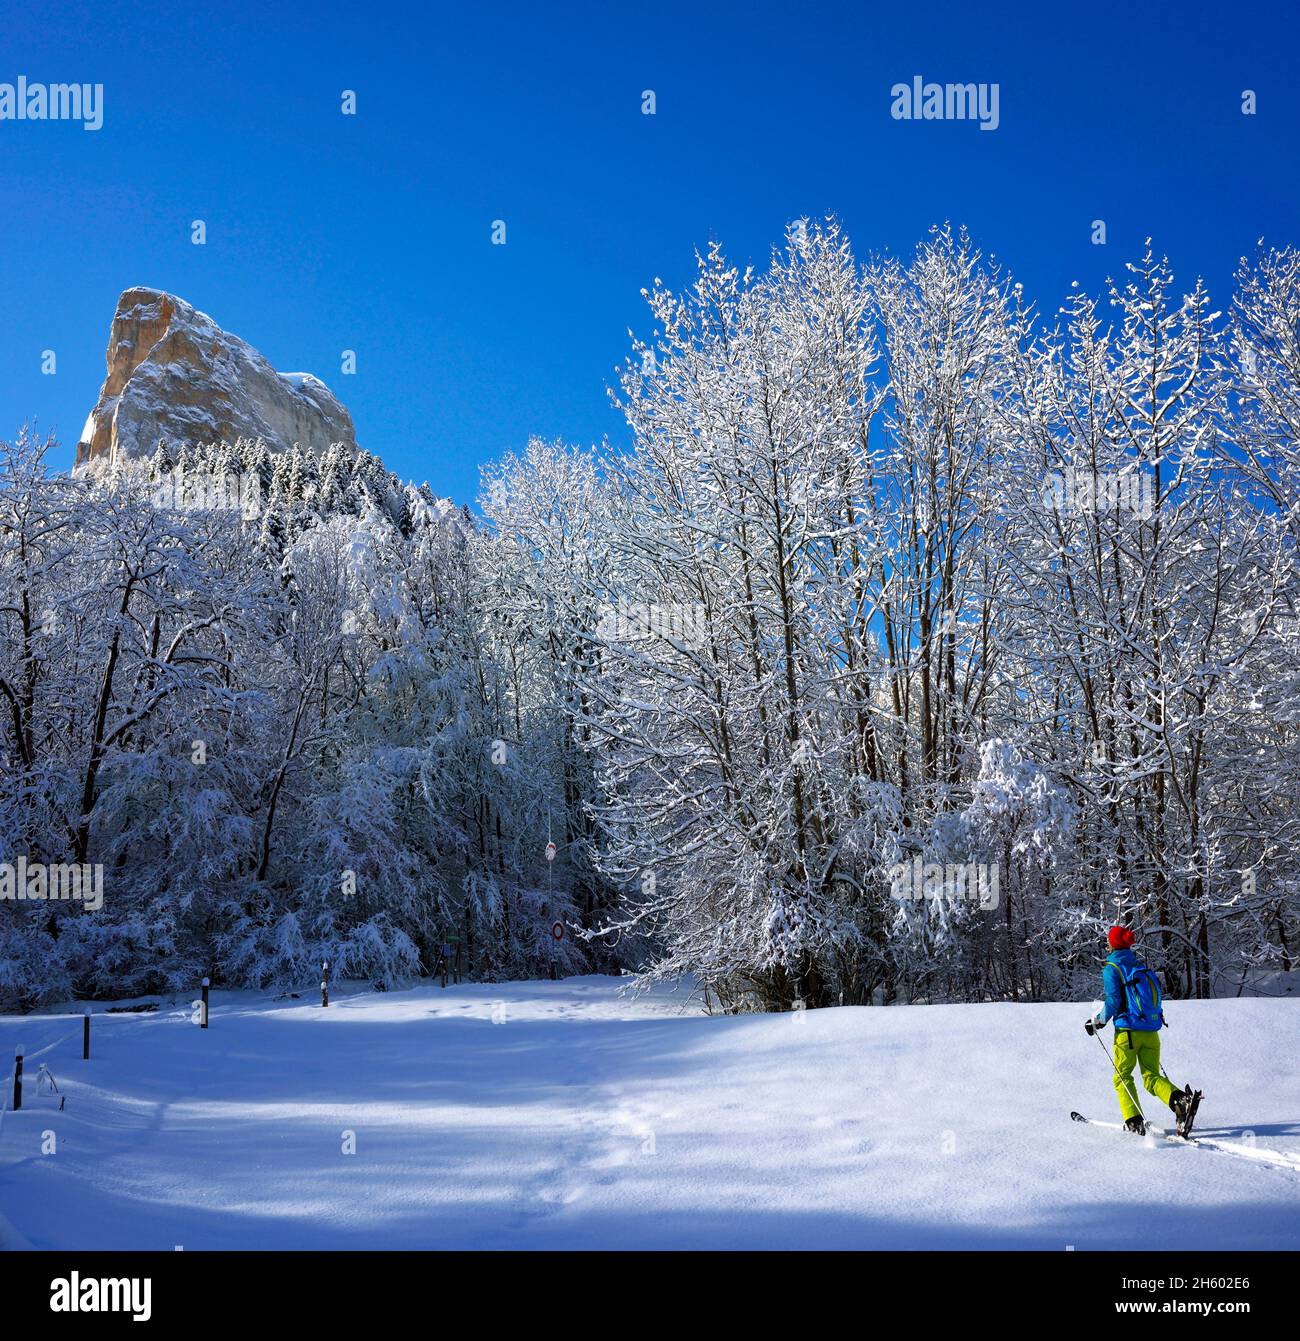 FRANCE, ISERE ( 38 ), SAINT MICHEL LES PORTES , TOURING SKI NEAR THE MONT AIGUILLE IN  THE NATURAL PARK OF VERCORS Stock Photo